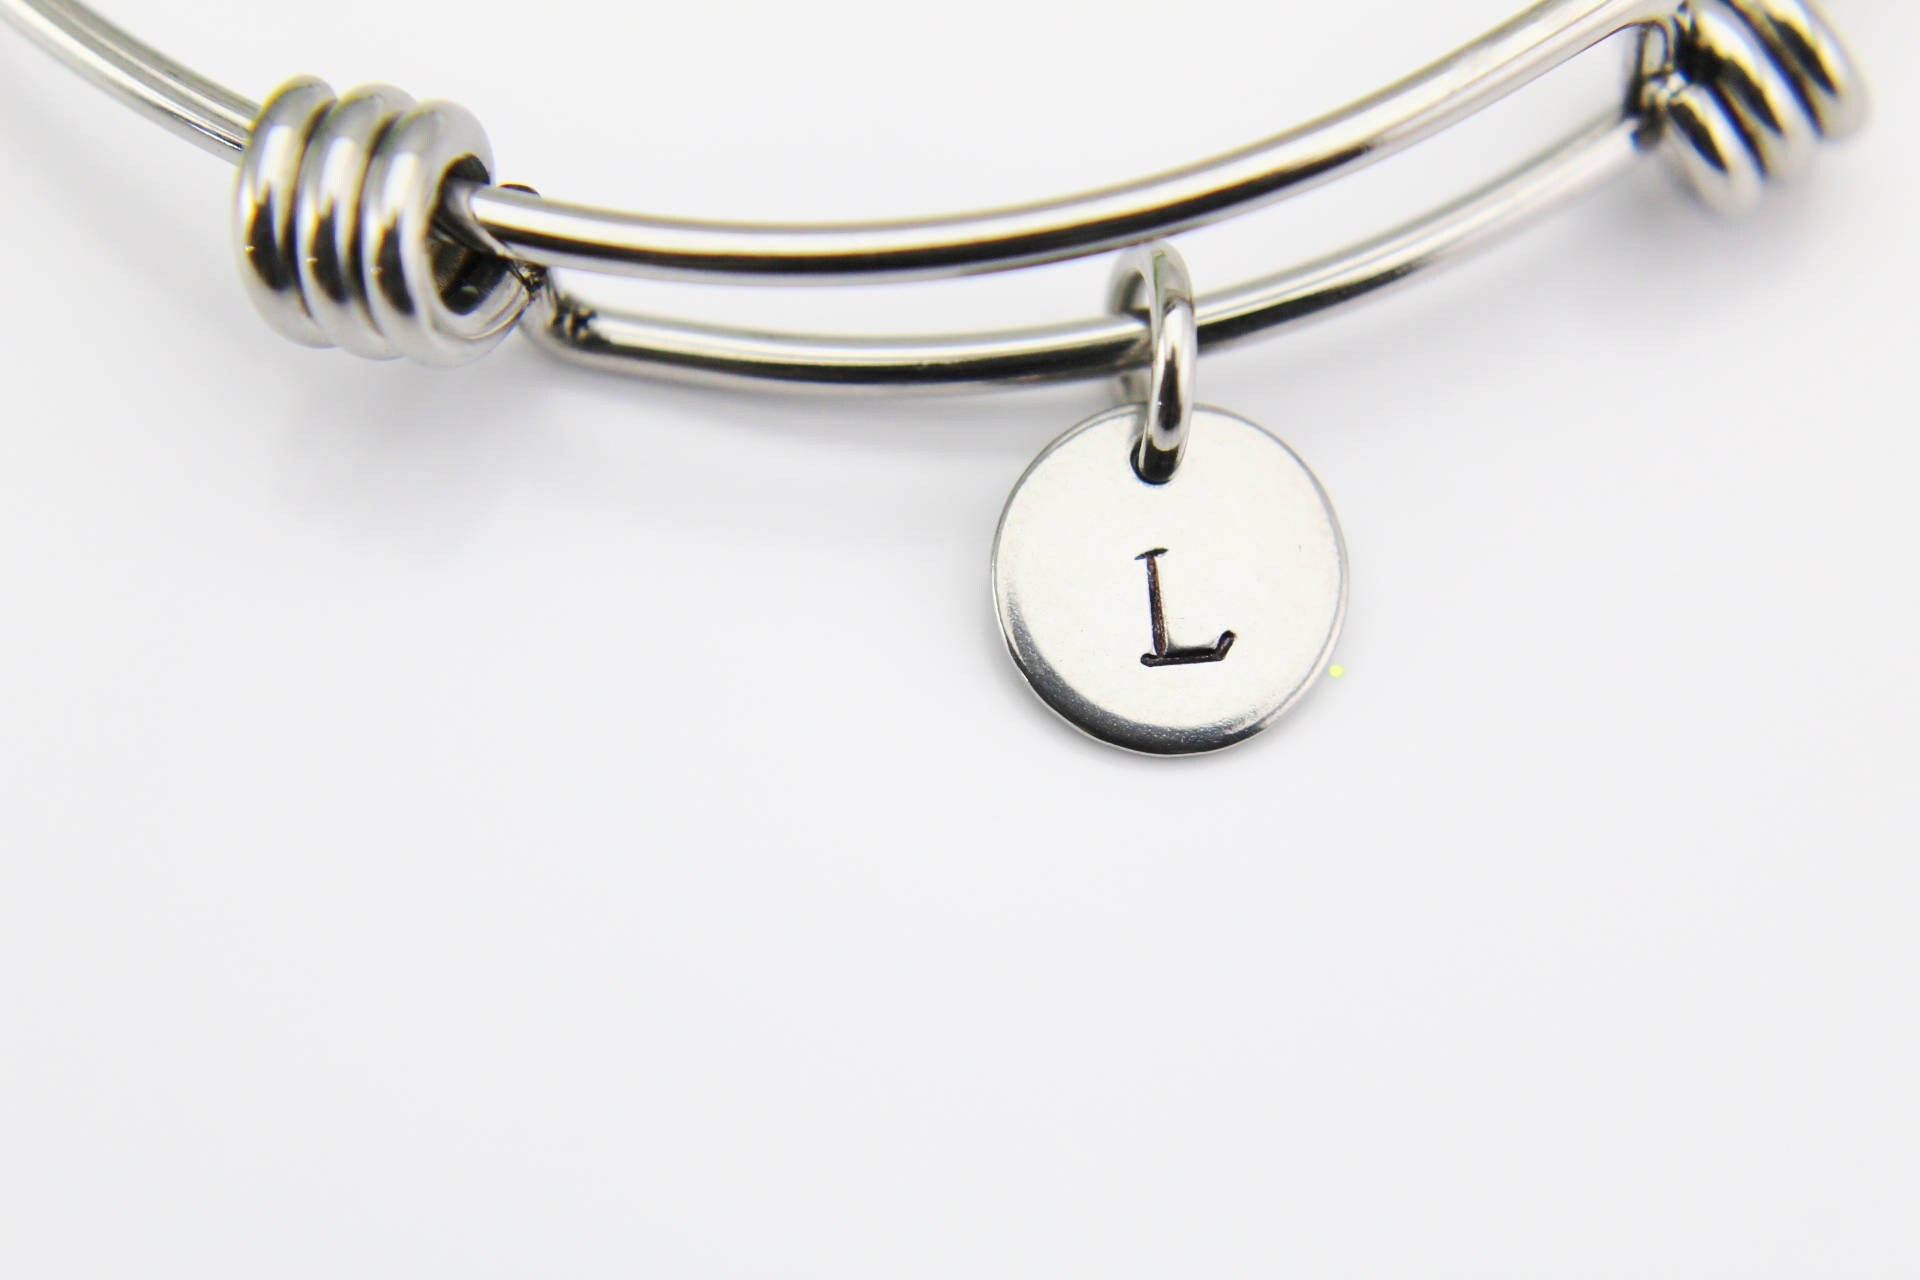 Stainless Steel Cable monogram initial Charm Bracelet/Bangle